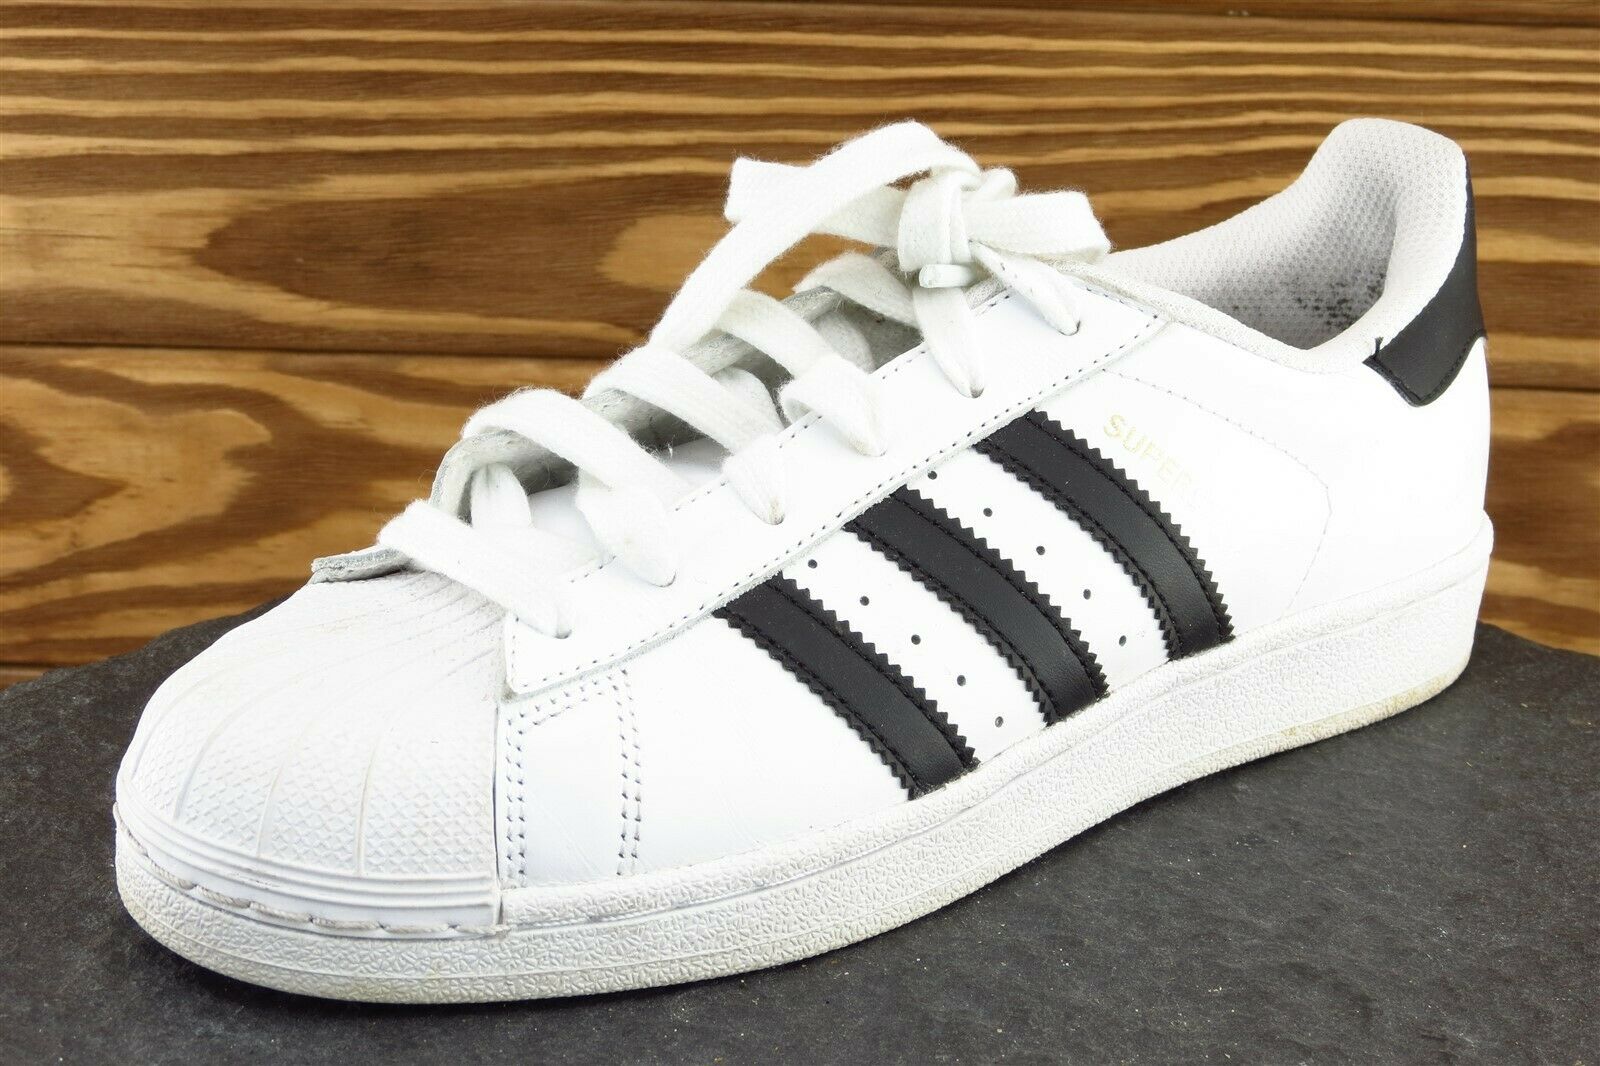 adidas Youth Boys Shoes Sz 5.5 M White Synthetic Fashion Sneakers